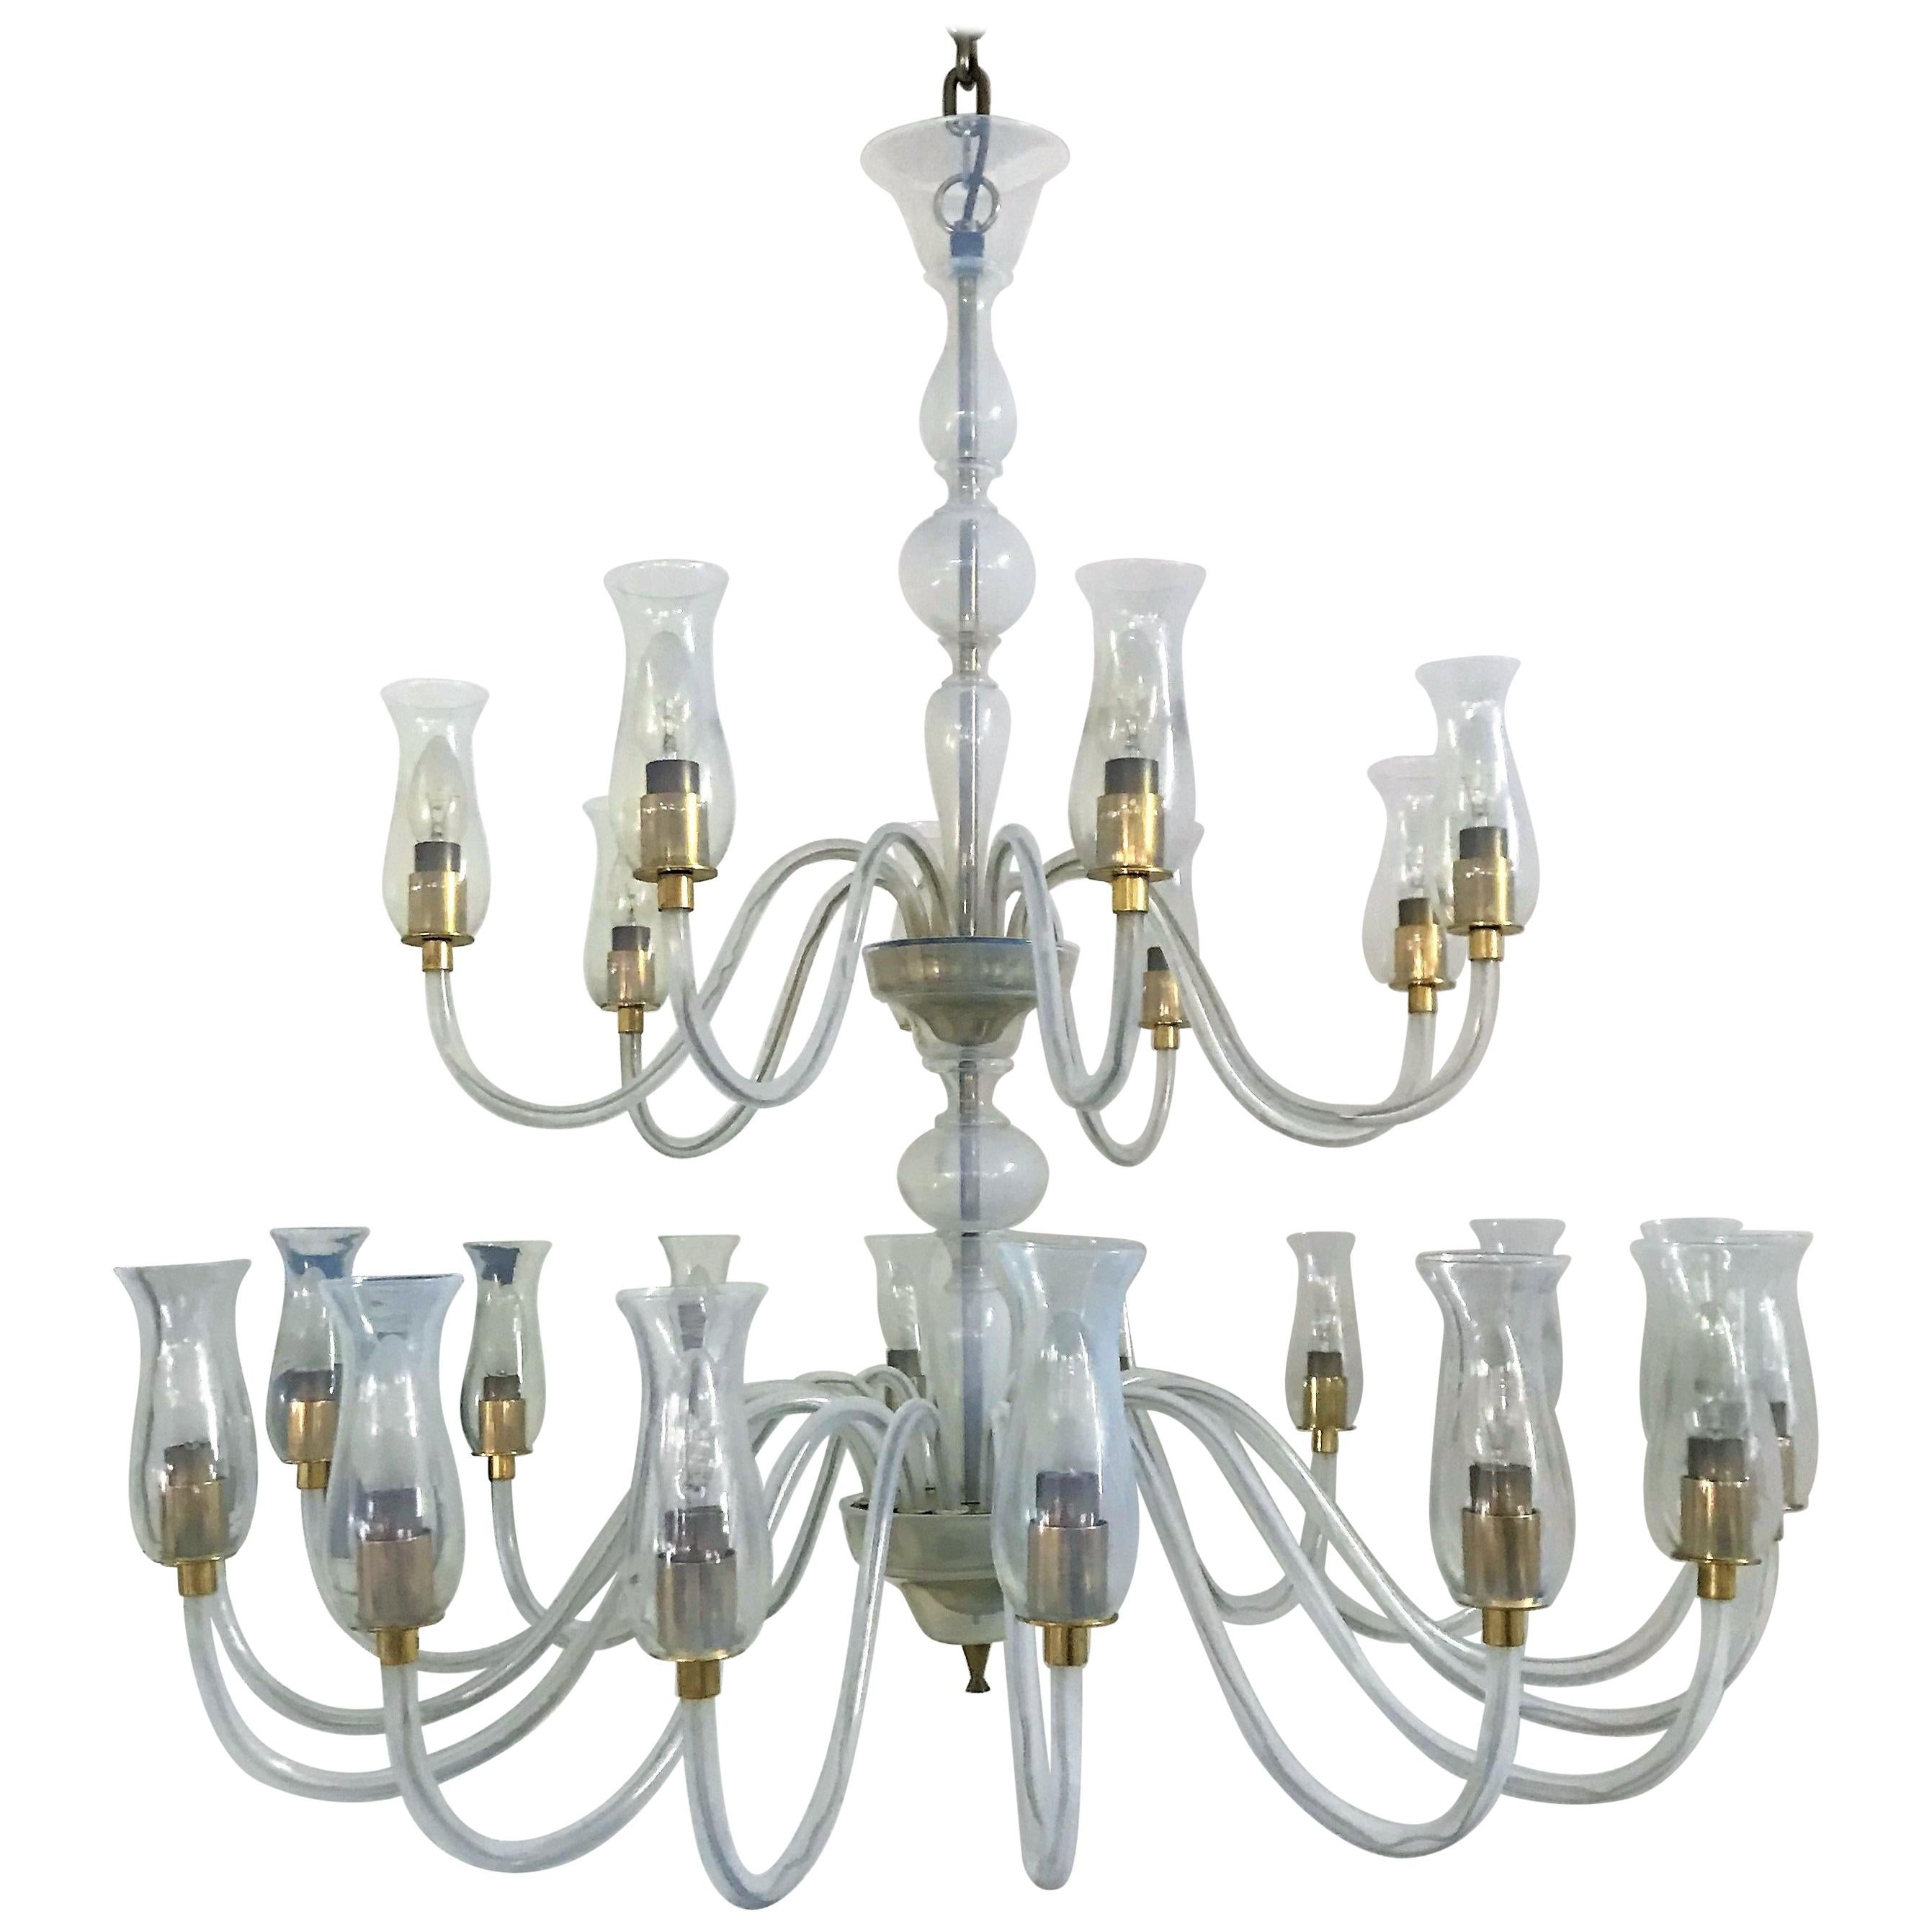 24-Light Mid Century Modern Chandelier by Cenedese in Murano Glass, circa 1970 For Sale